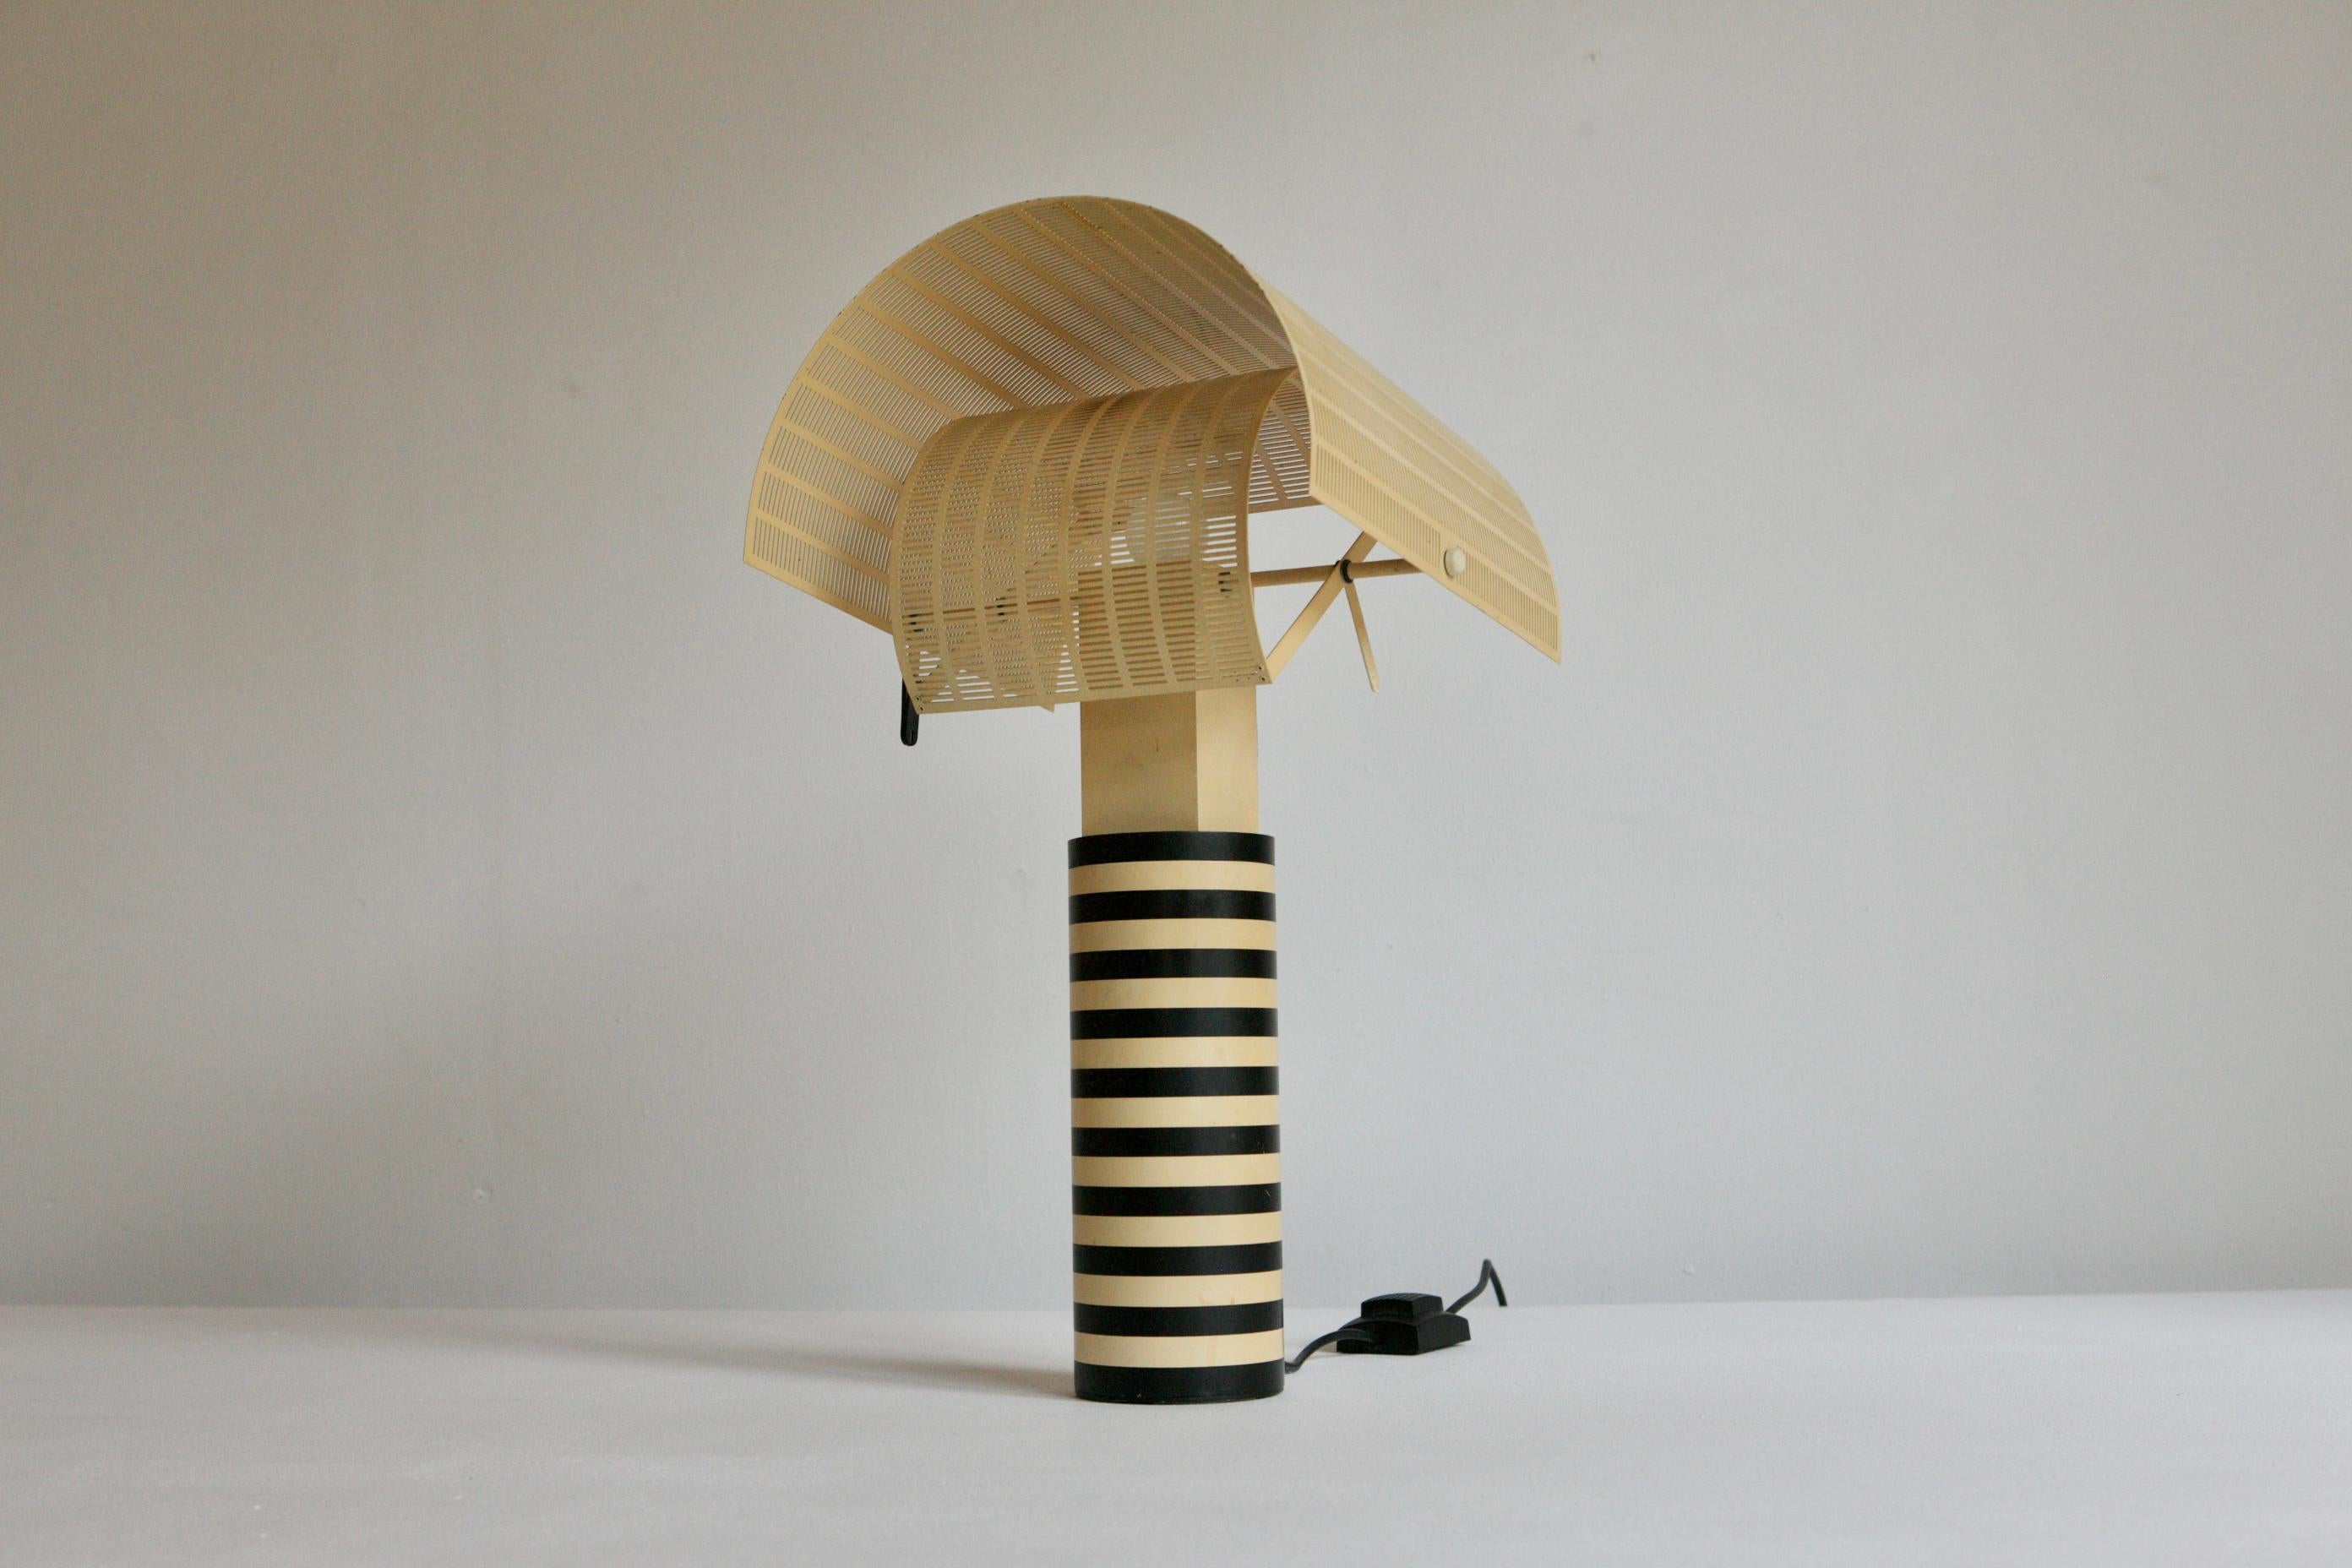 An original Shogun lamp that was designed by Mario Botta for lighting manufacturers Artemide. The iconic lamp was a ground breaking postmodern design with it's striped beacon base. It has perfect function with it's perforated rotating shades.  It's